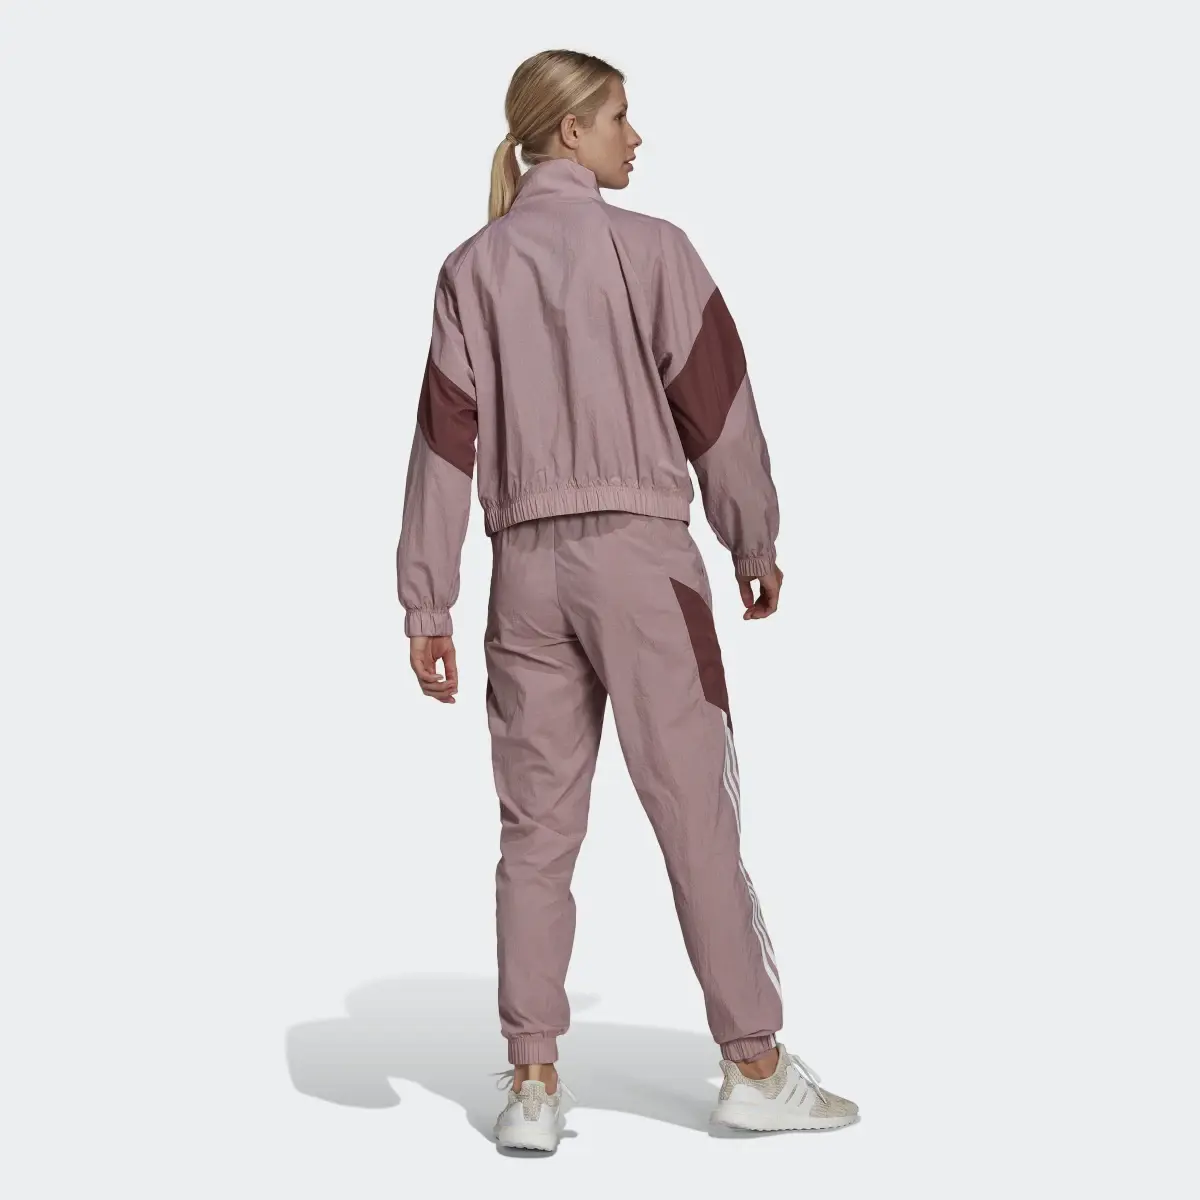 Adidas Sportswear Game Time Track Suit. 3